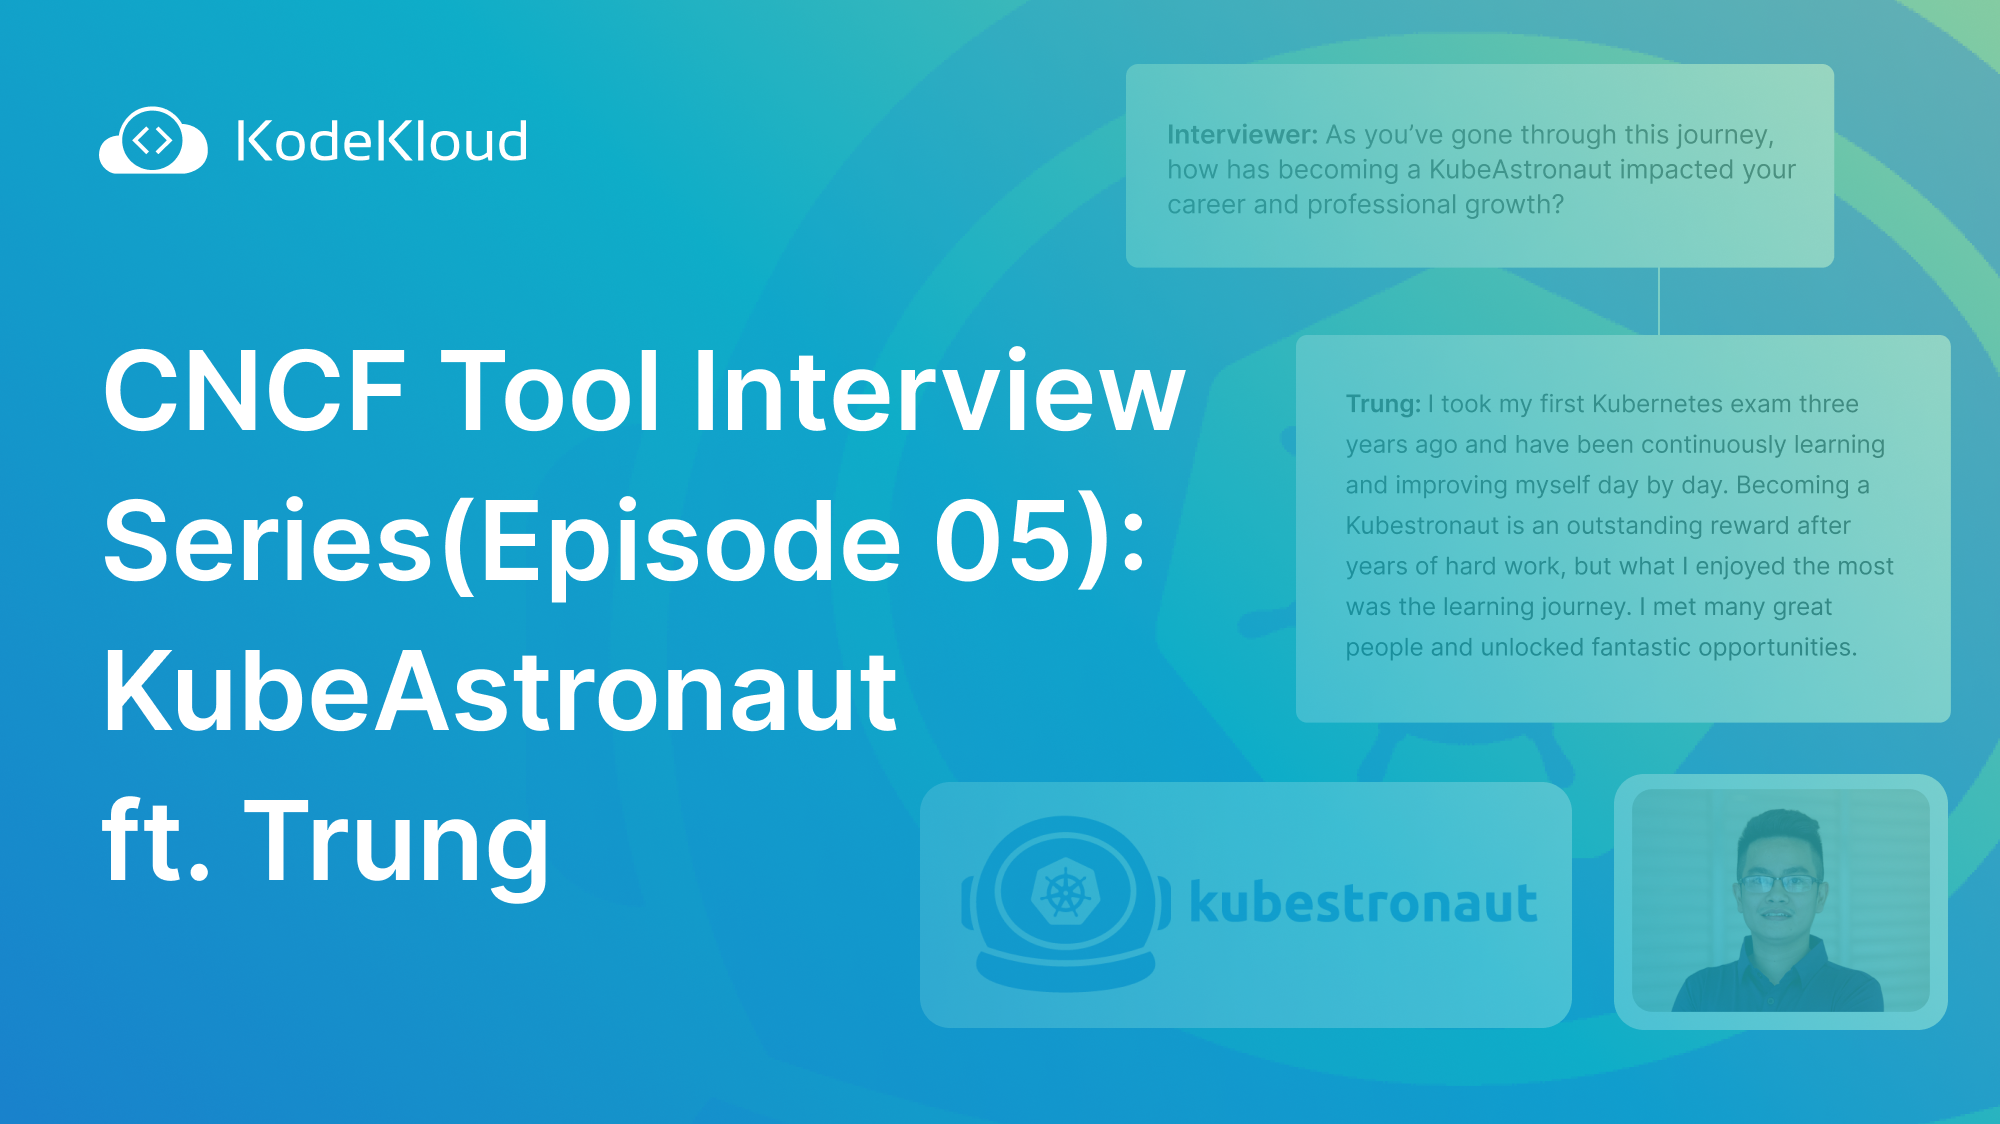 CNCF Tool Interview Series(Episode 05): KubeAstronaut ft. Trung